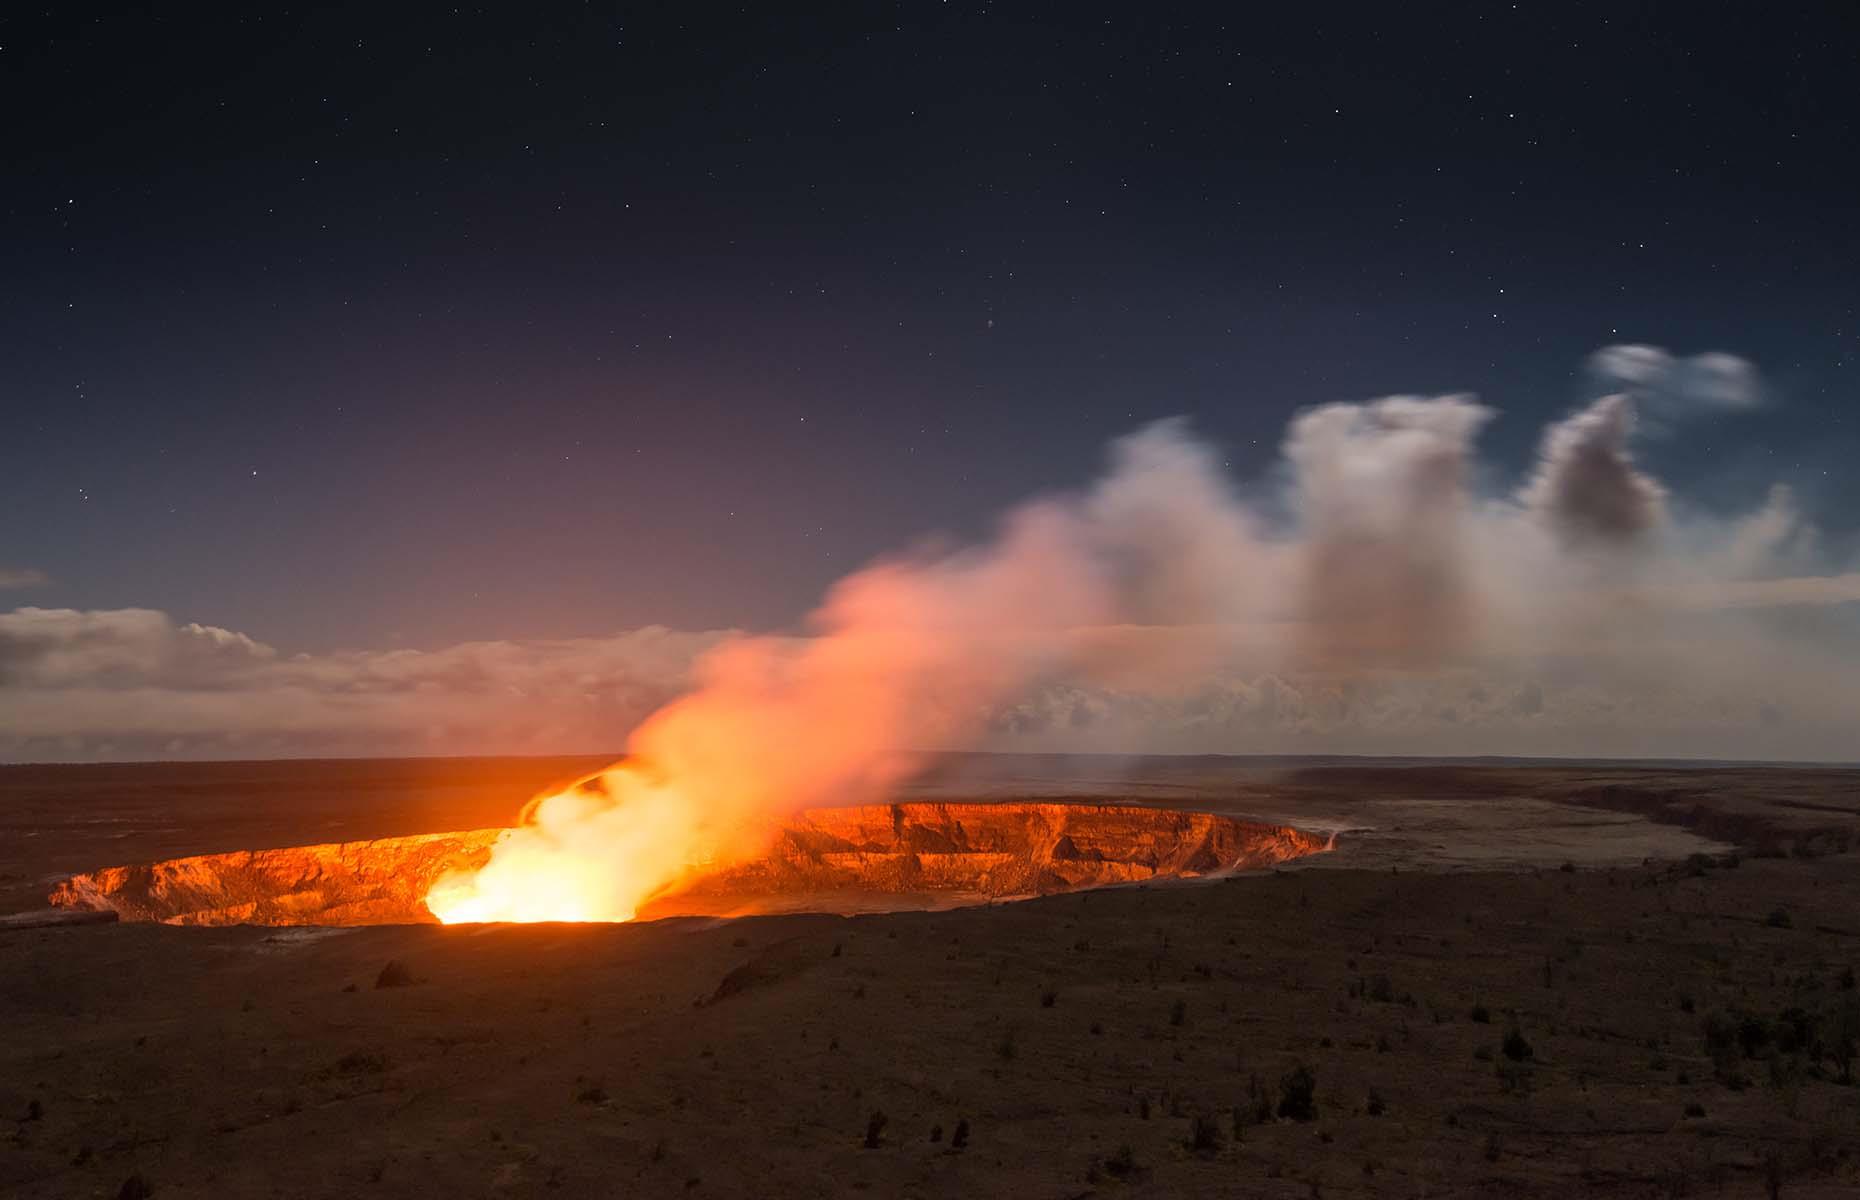 Kīlauea, on Hawaii’s Big Island, had been constantly erupting molten lava since 1983 until the eruption was finally declared to have ended on 5 December 2018 after 90 days of inactivity. The name Kīlauea means much spreading or spewing in Hawaiian – a reference to its frequent outpouring of lava that flows into the ocean.